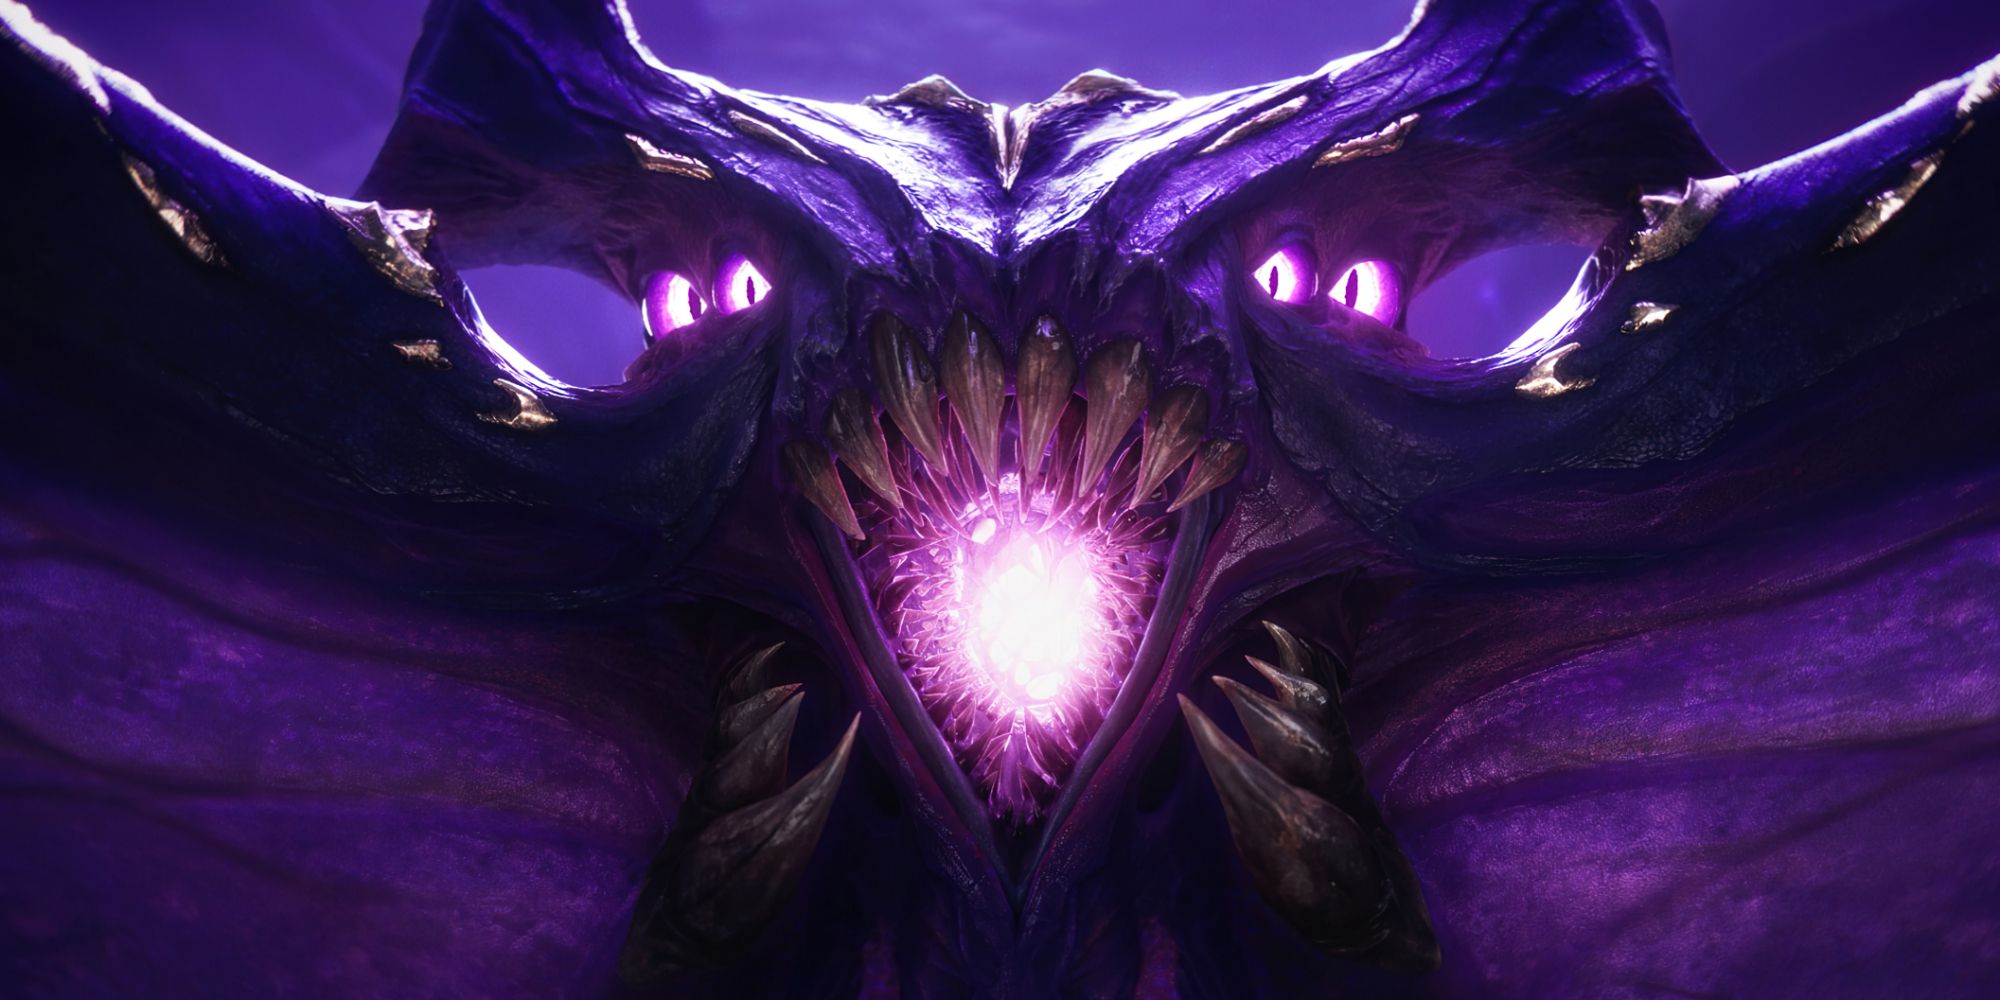 The Empress of the Void in her full, monstrous beauty in her champion teaser, her eyes aglow and brandishing her teeth